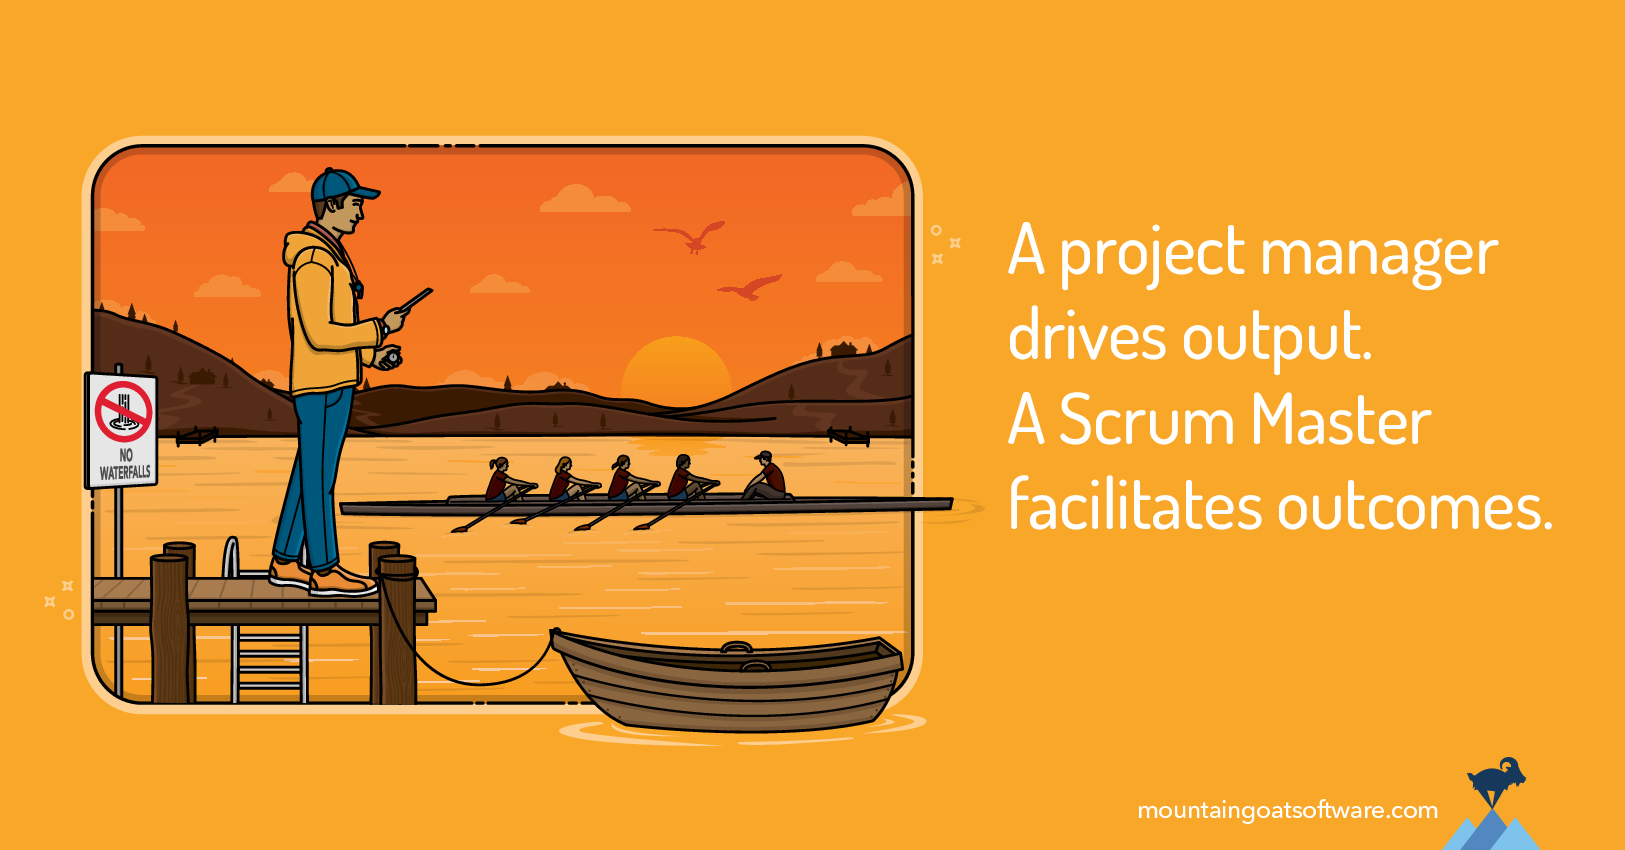 From Project Manager to Scrum Master -3 Tips for Making the Transition